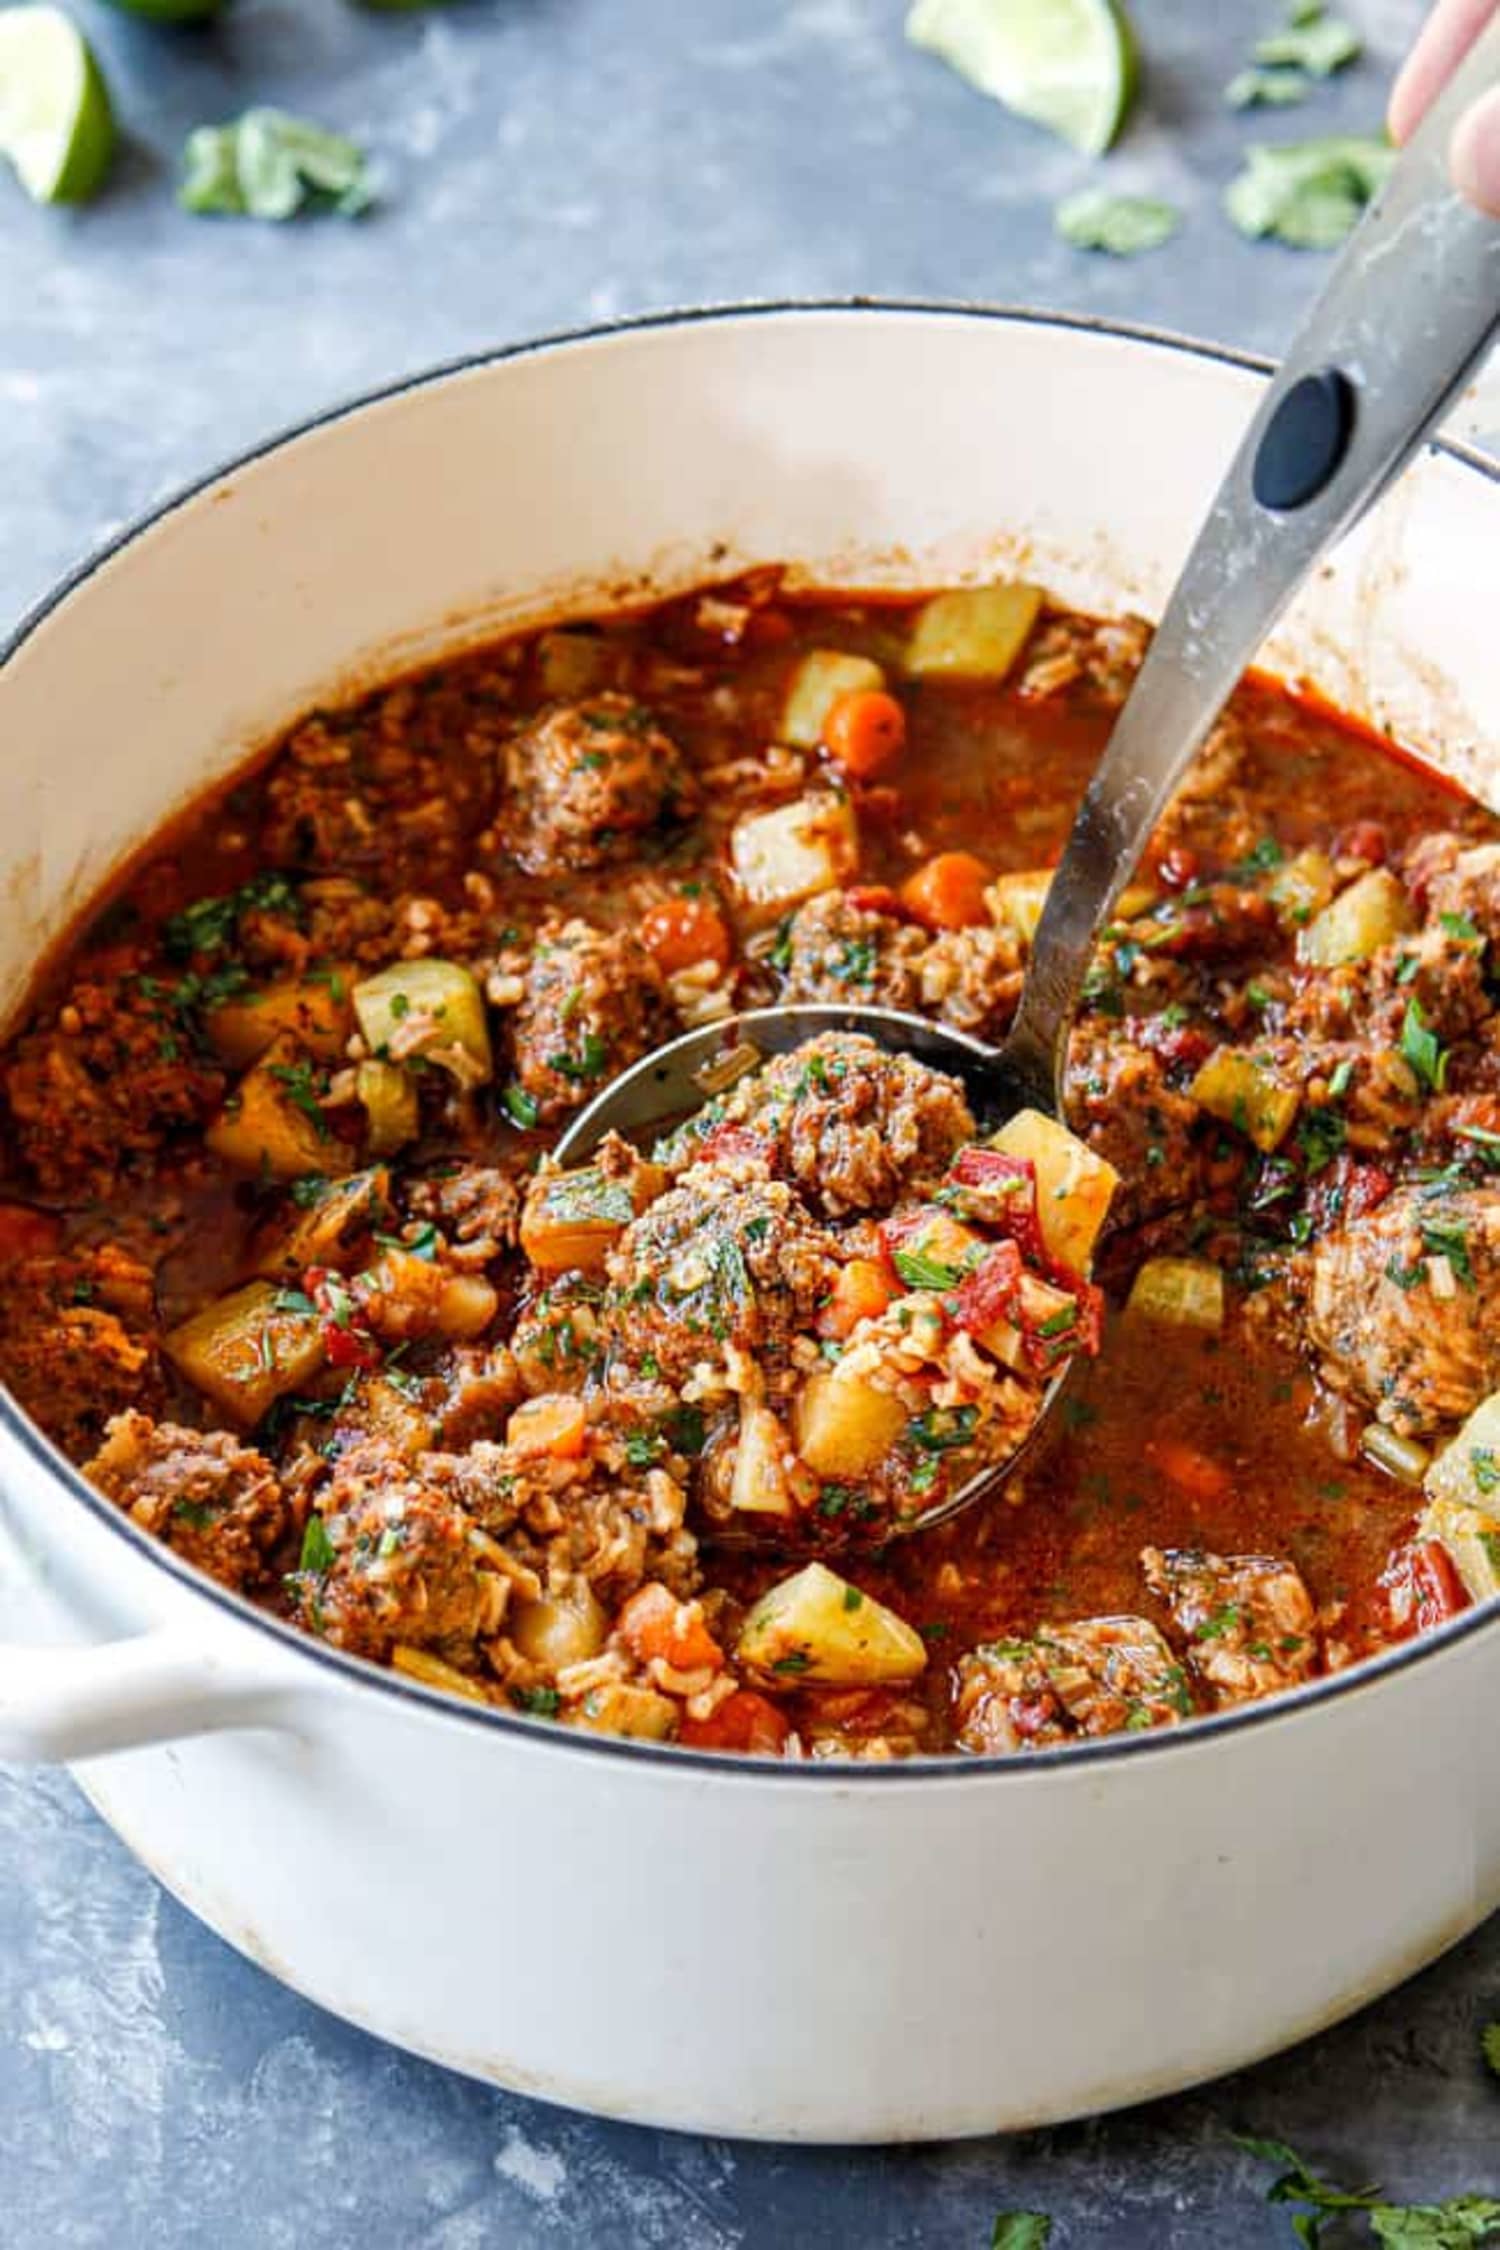 This Meatball Soup Will Make Winter So Much Better